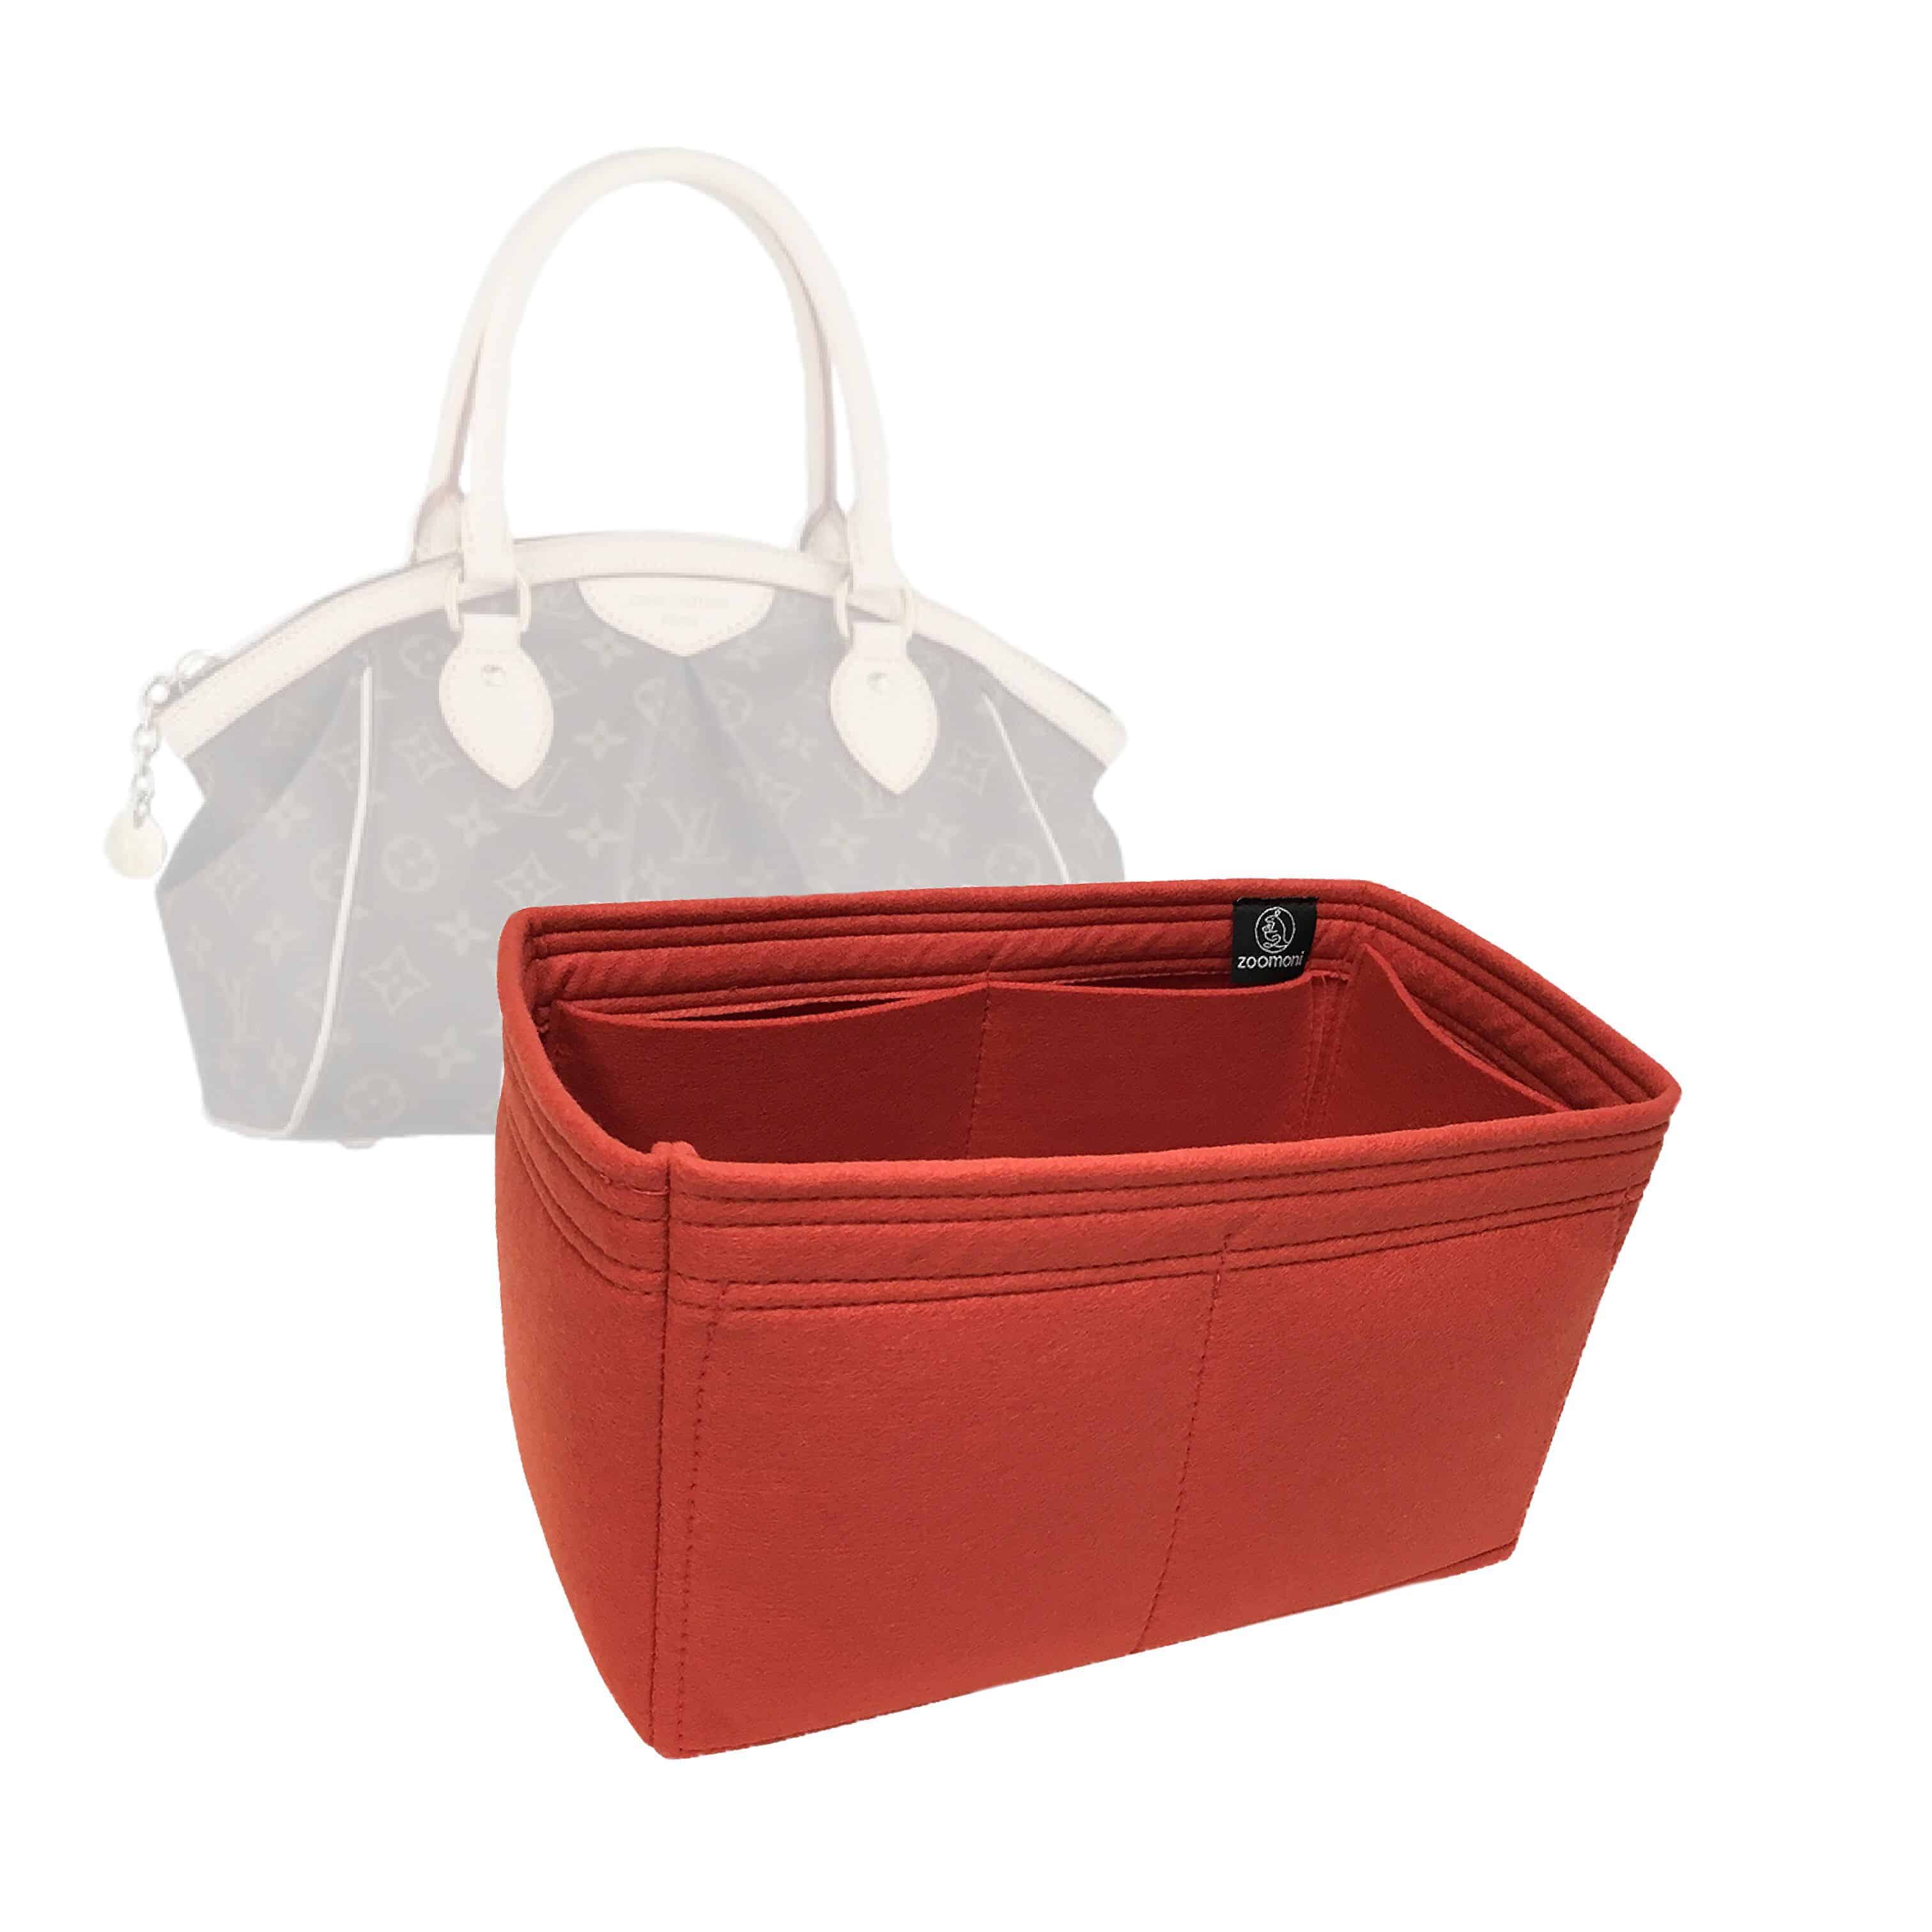 Tote Bag Organizer For Louis Vuitton Graceful PM Bag with Double Bottl